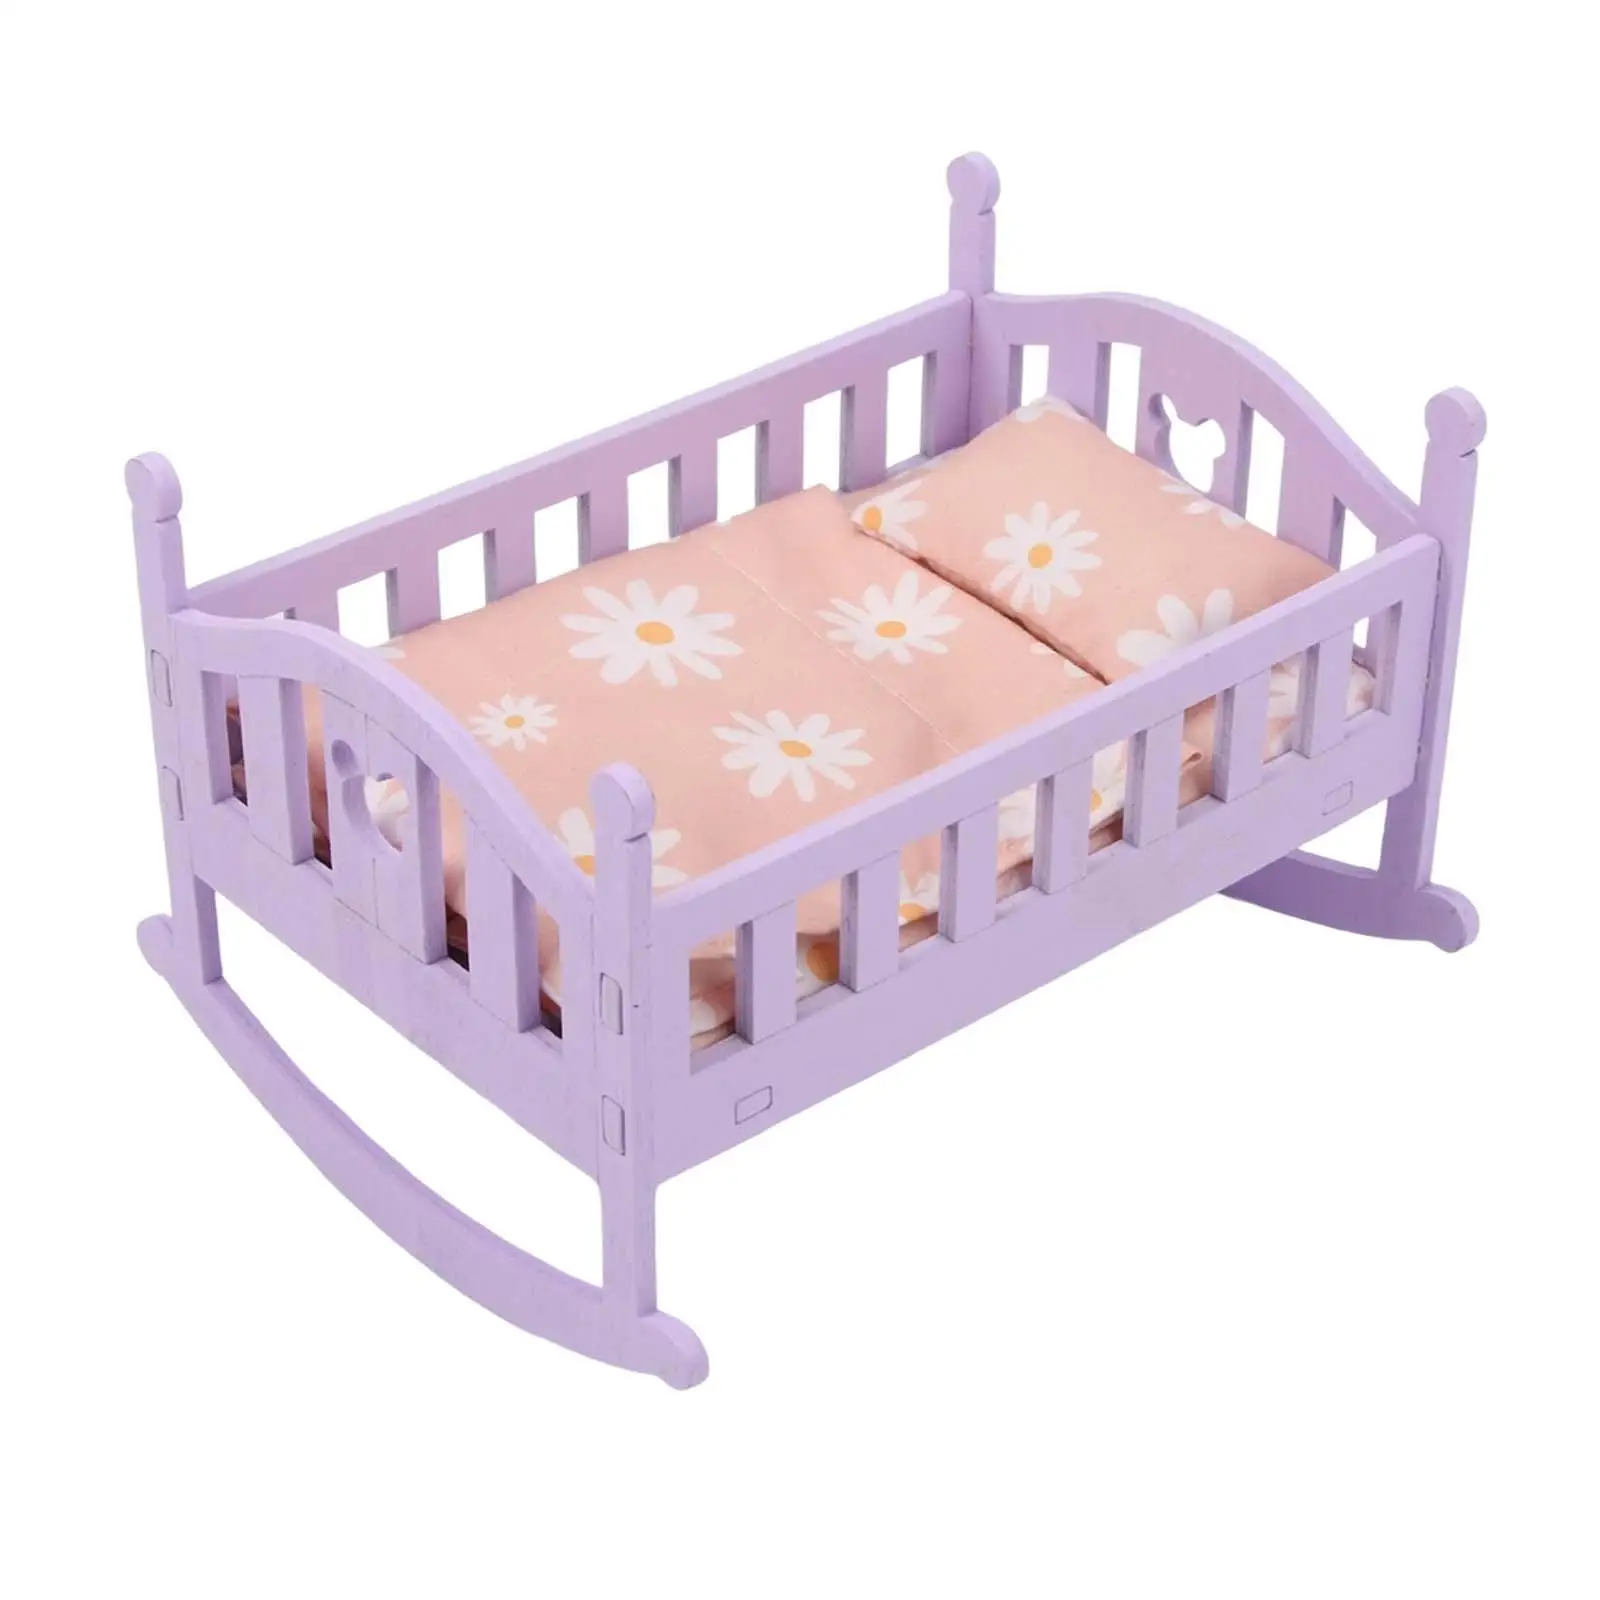 High Simulation Baby Doll Bed Furniture for 16cm Doll Accessories DIY Scene